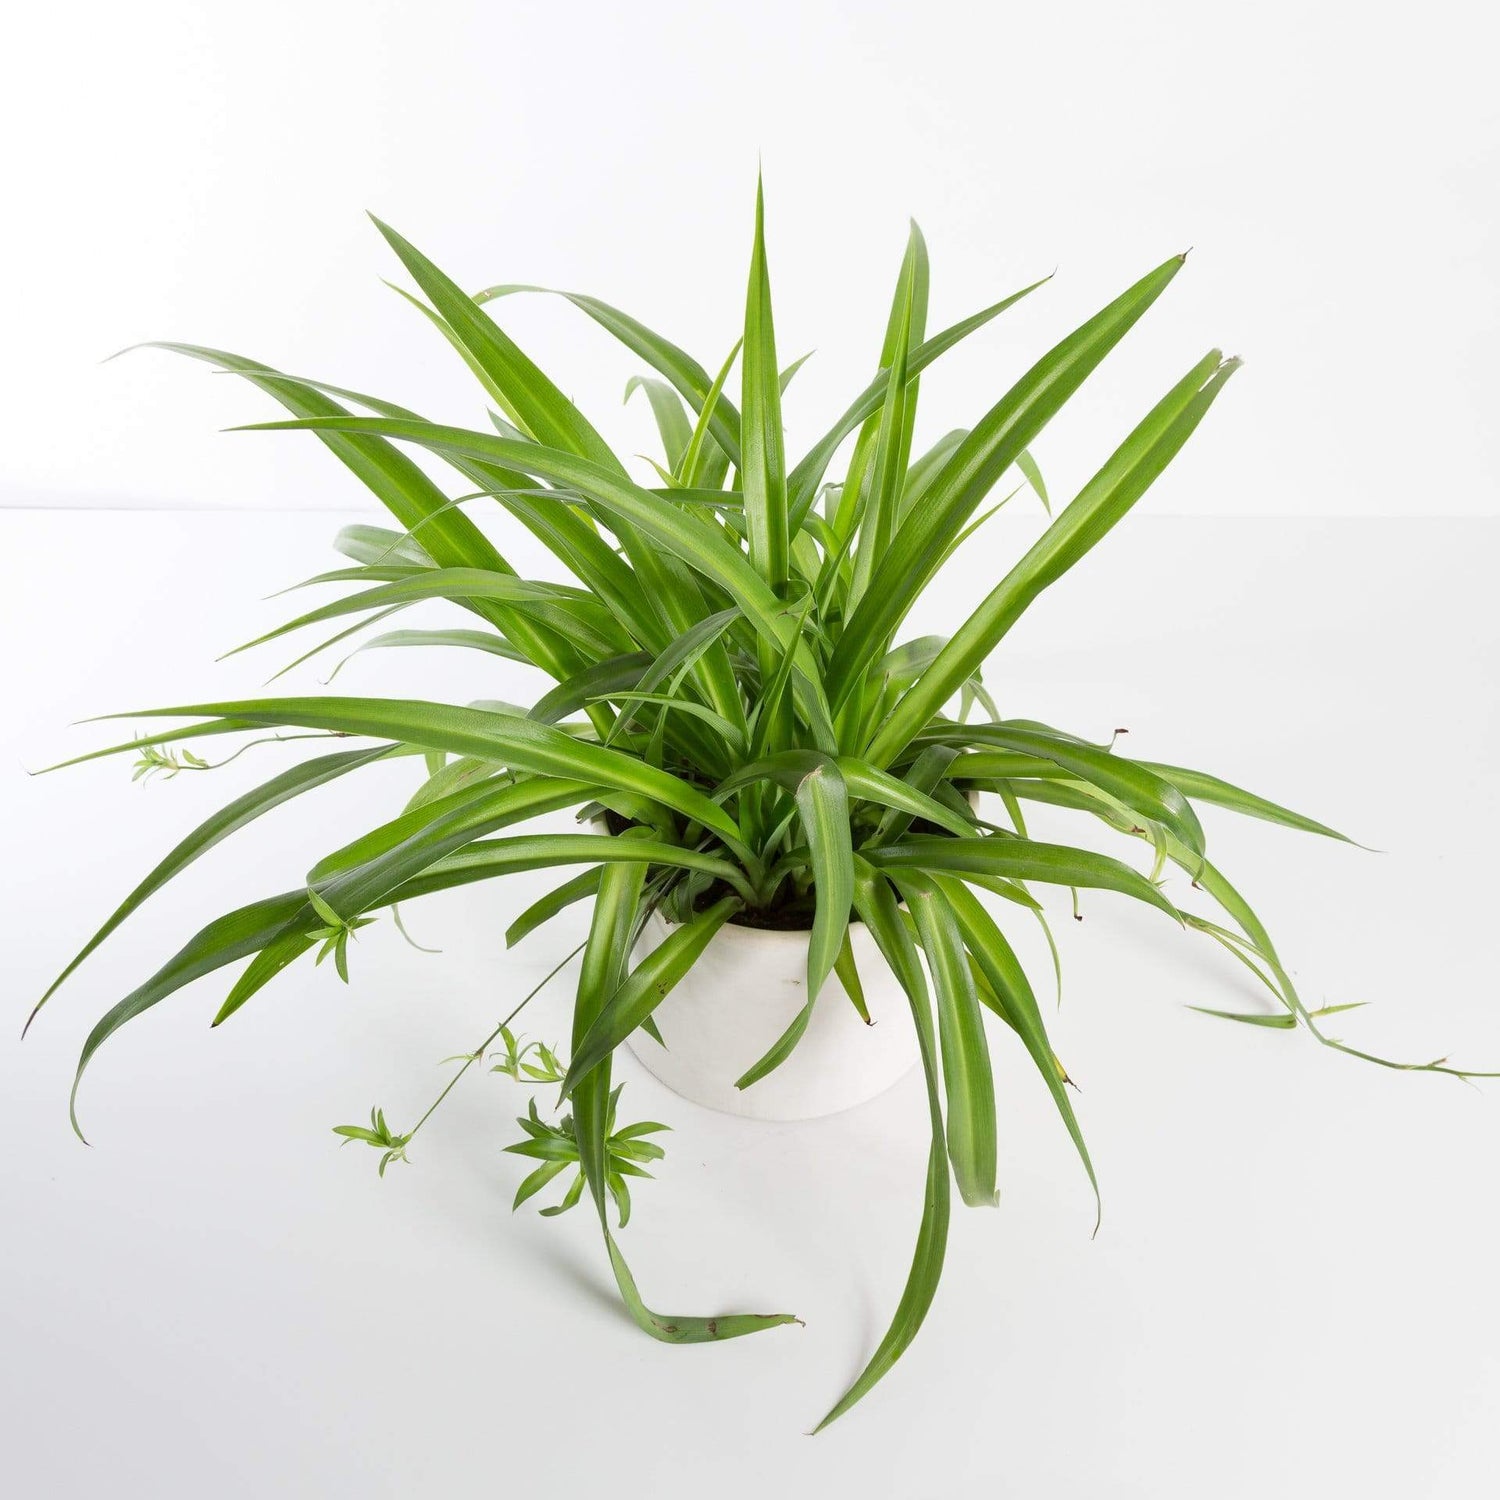 Urban Sprouts Plant 6" in nursery pot Spider Plant 'Green'